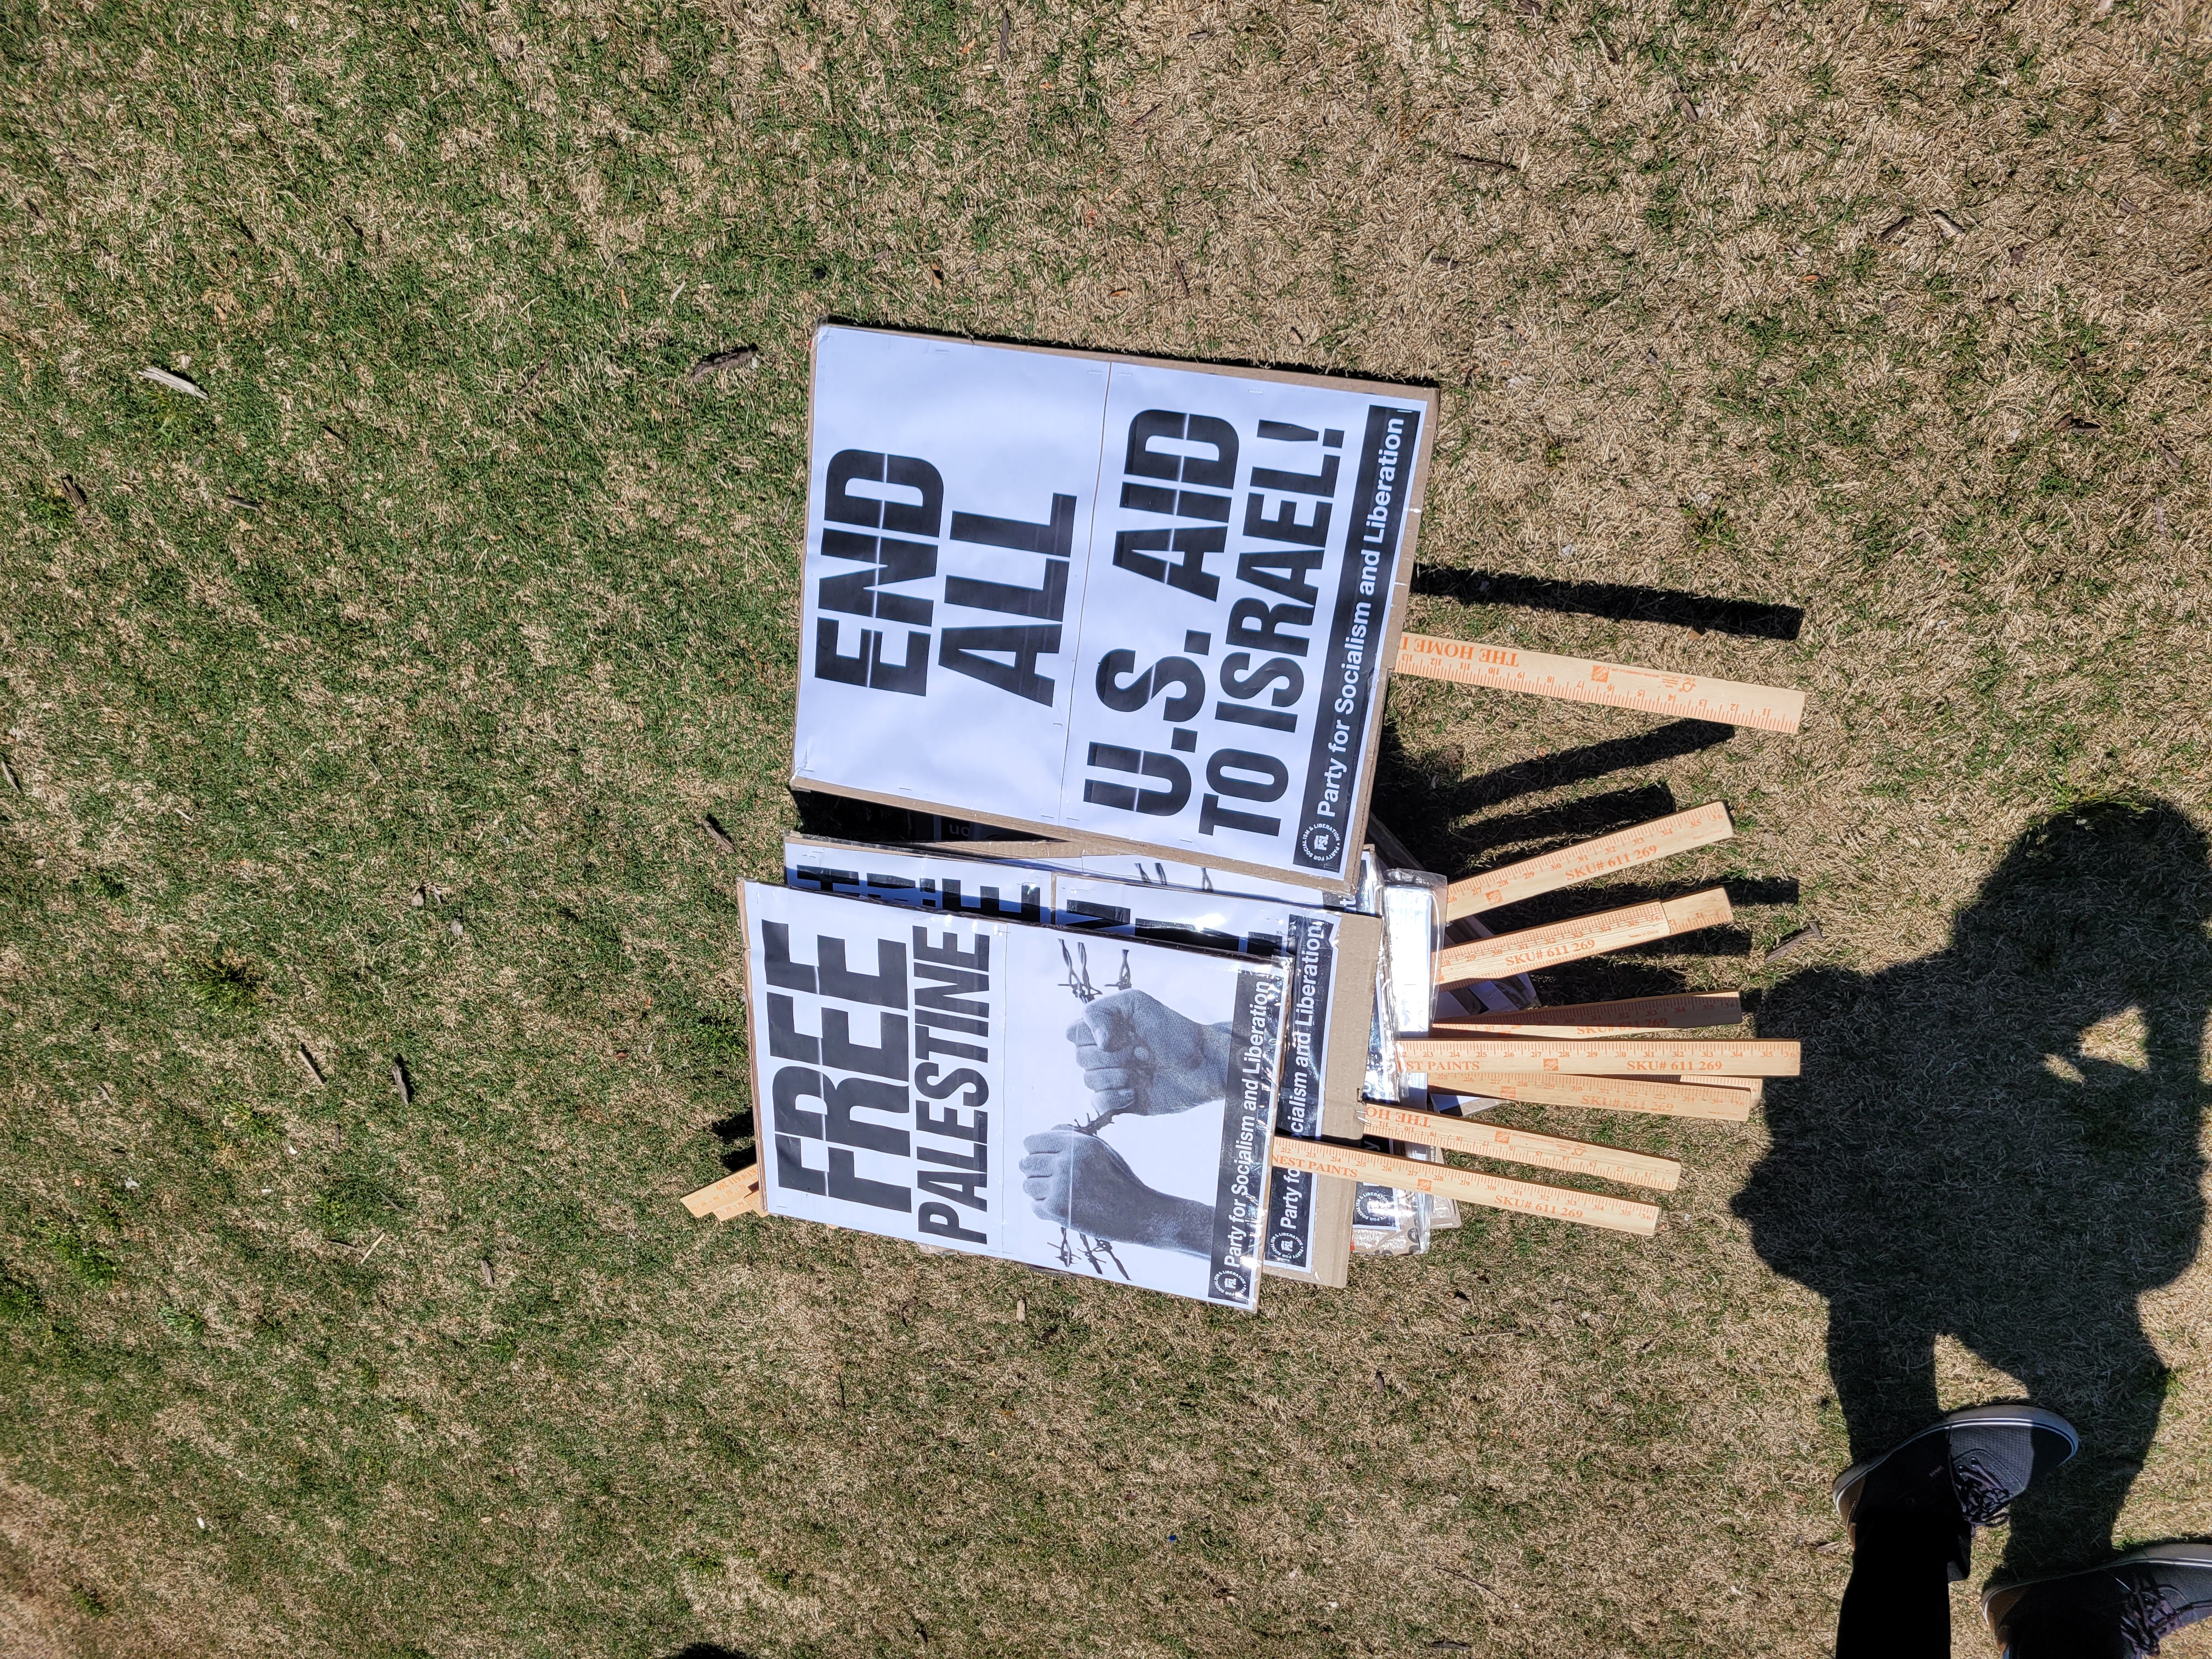 Picket signs at the April 15 protest. Photo Credit: Erin Cater